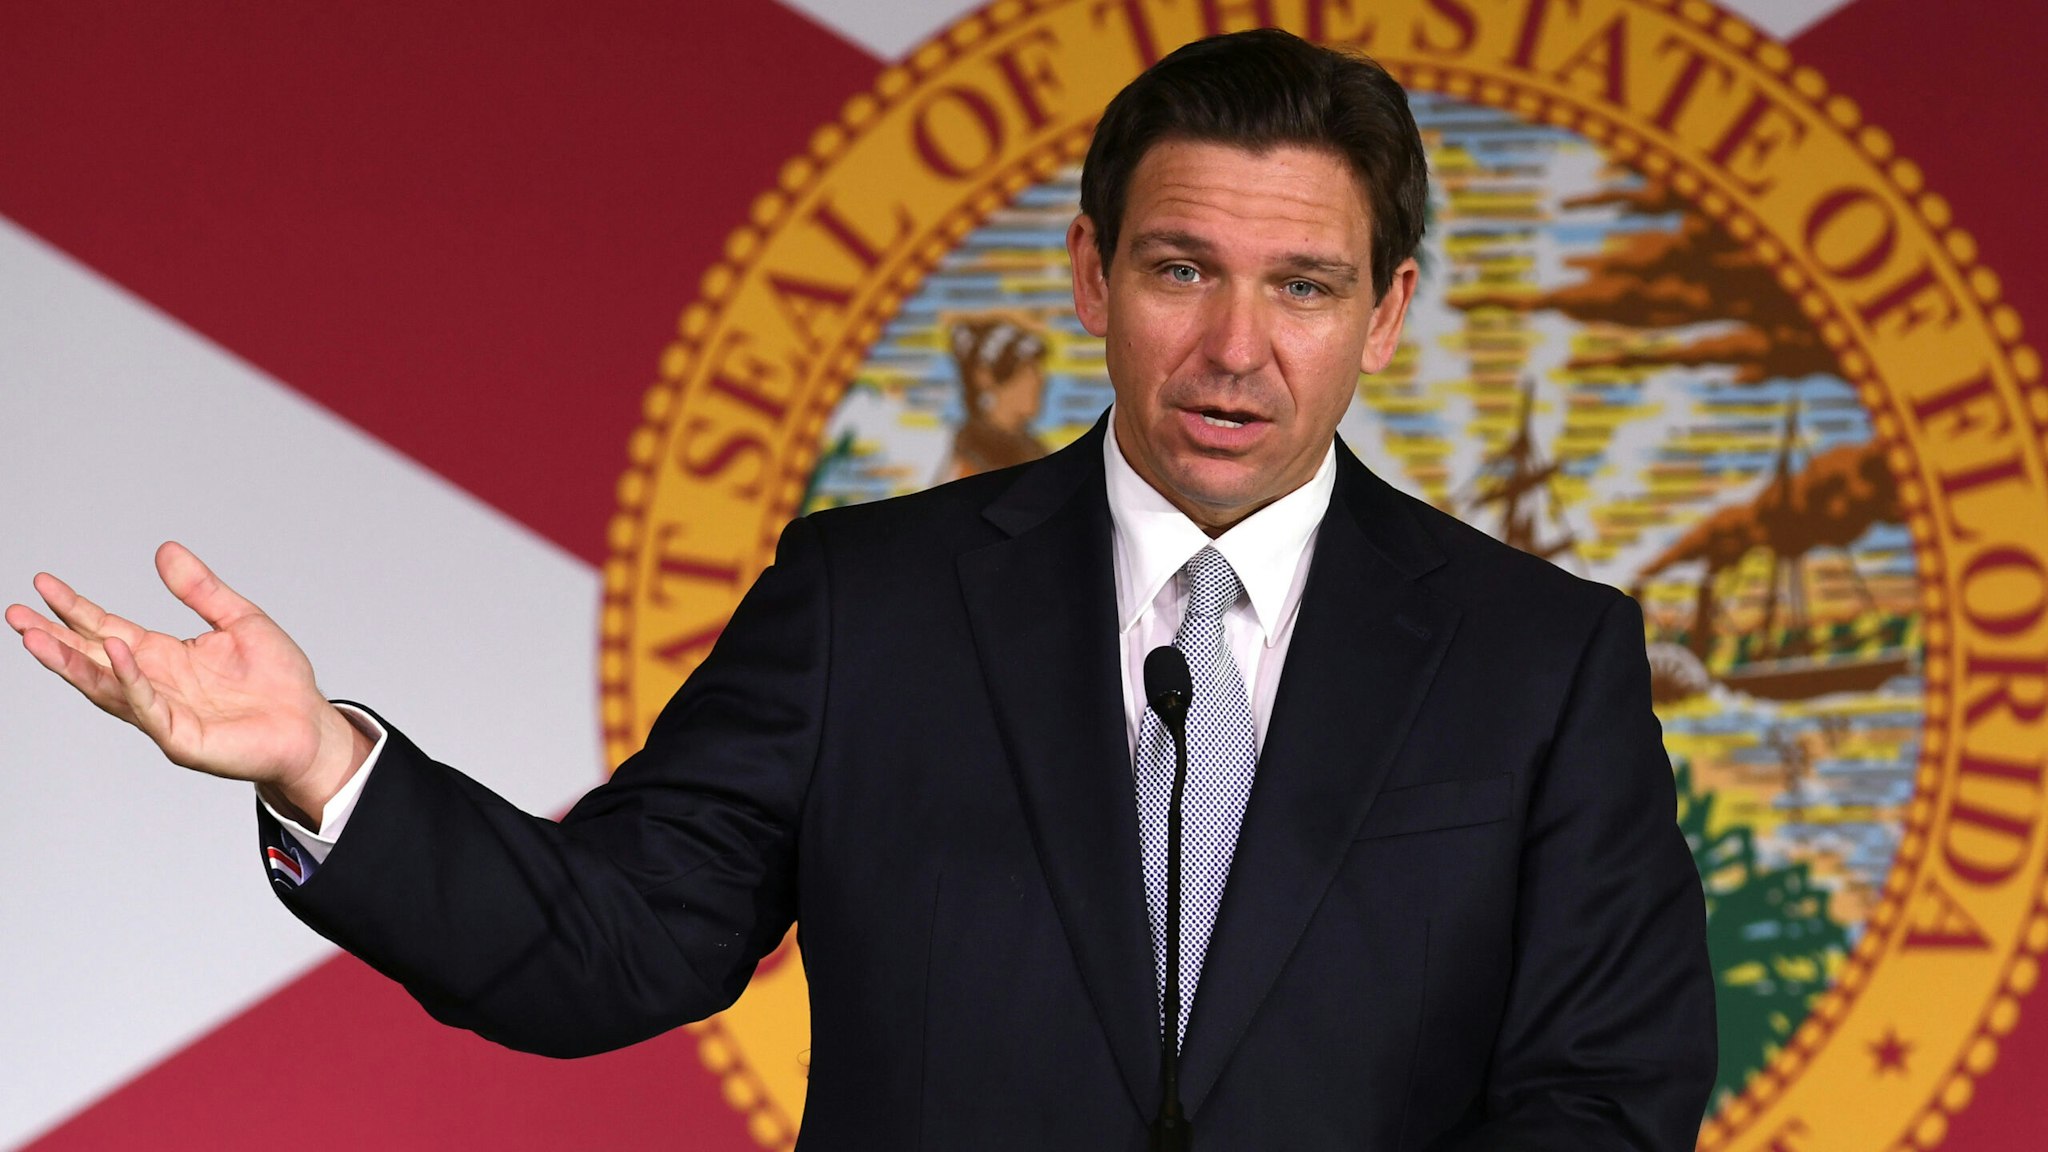 WILDWOOD, FLORIDA, UNITED STATES - JUNE 6: Republican presidential candidate Florida Gov. Ron DeSantis speaks during a press conference during which he signed a bill to protect the digital rights of Floridians, on June 6, 2023 in Wildwood, Florida.